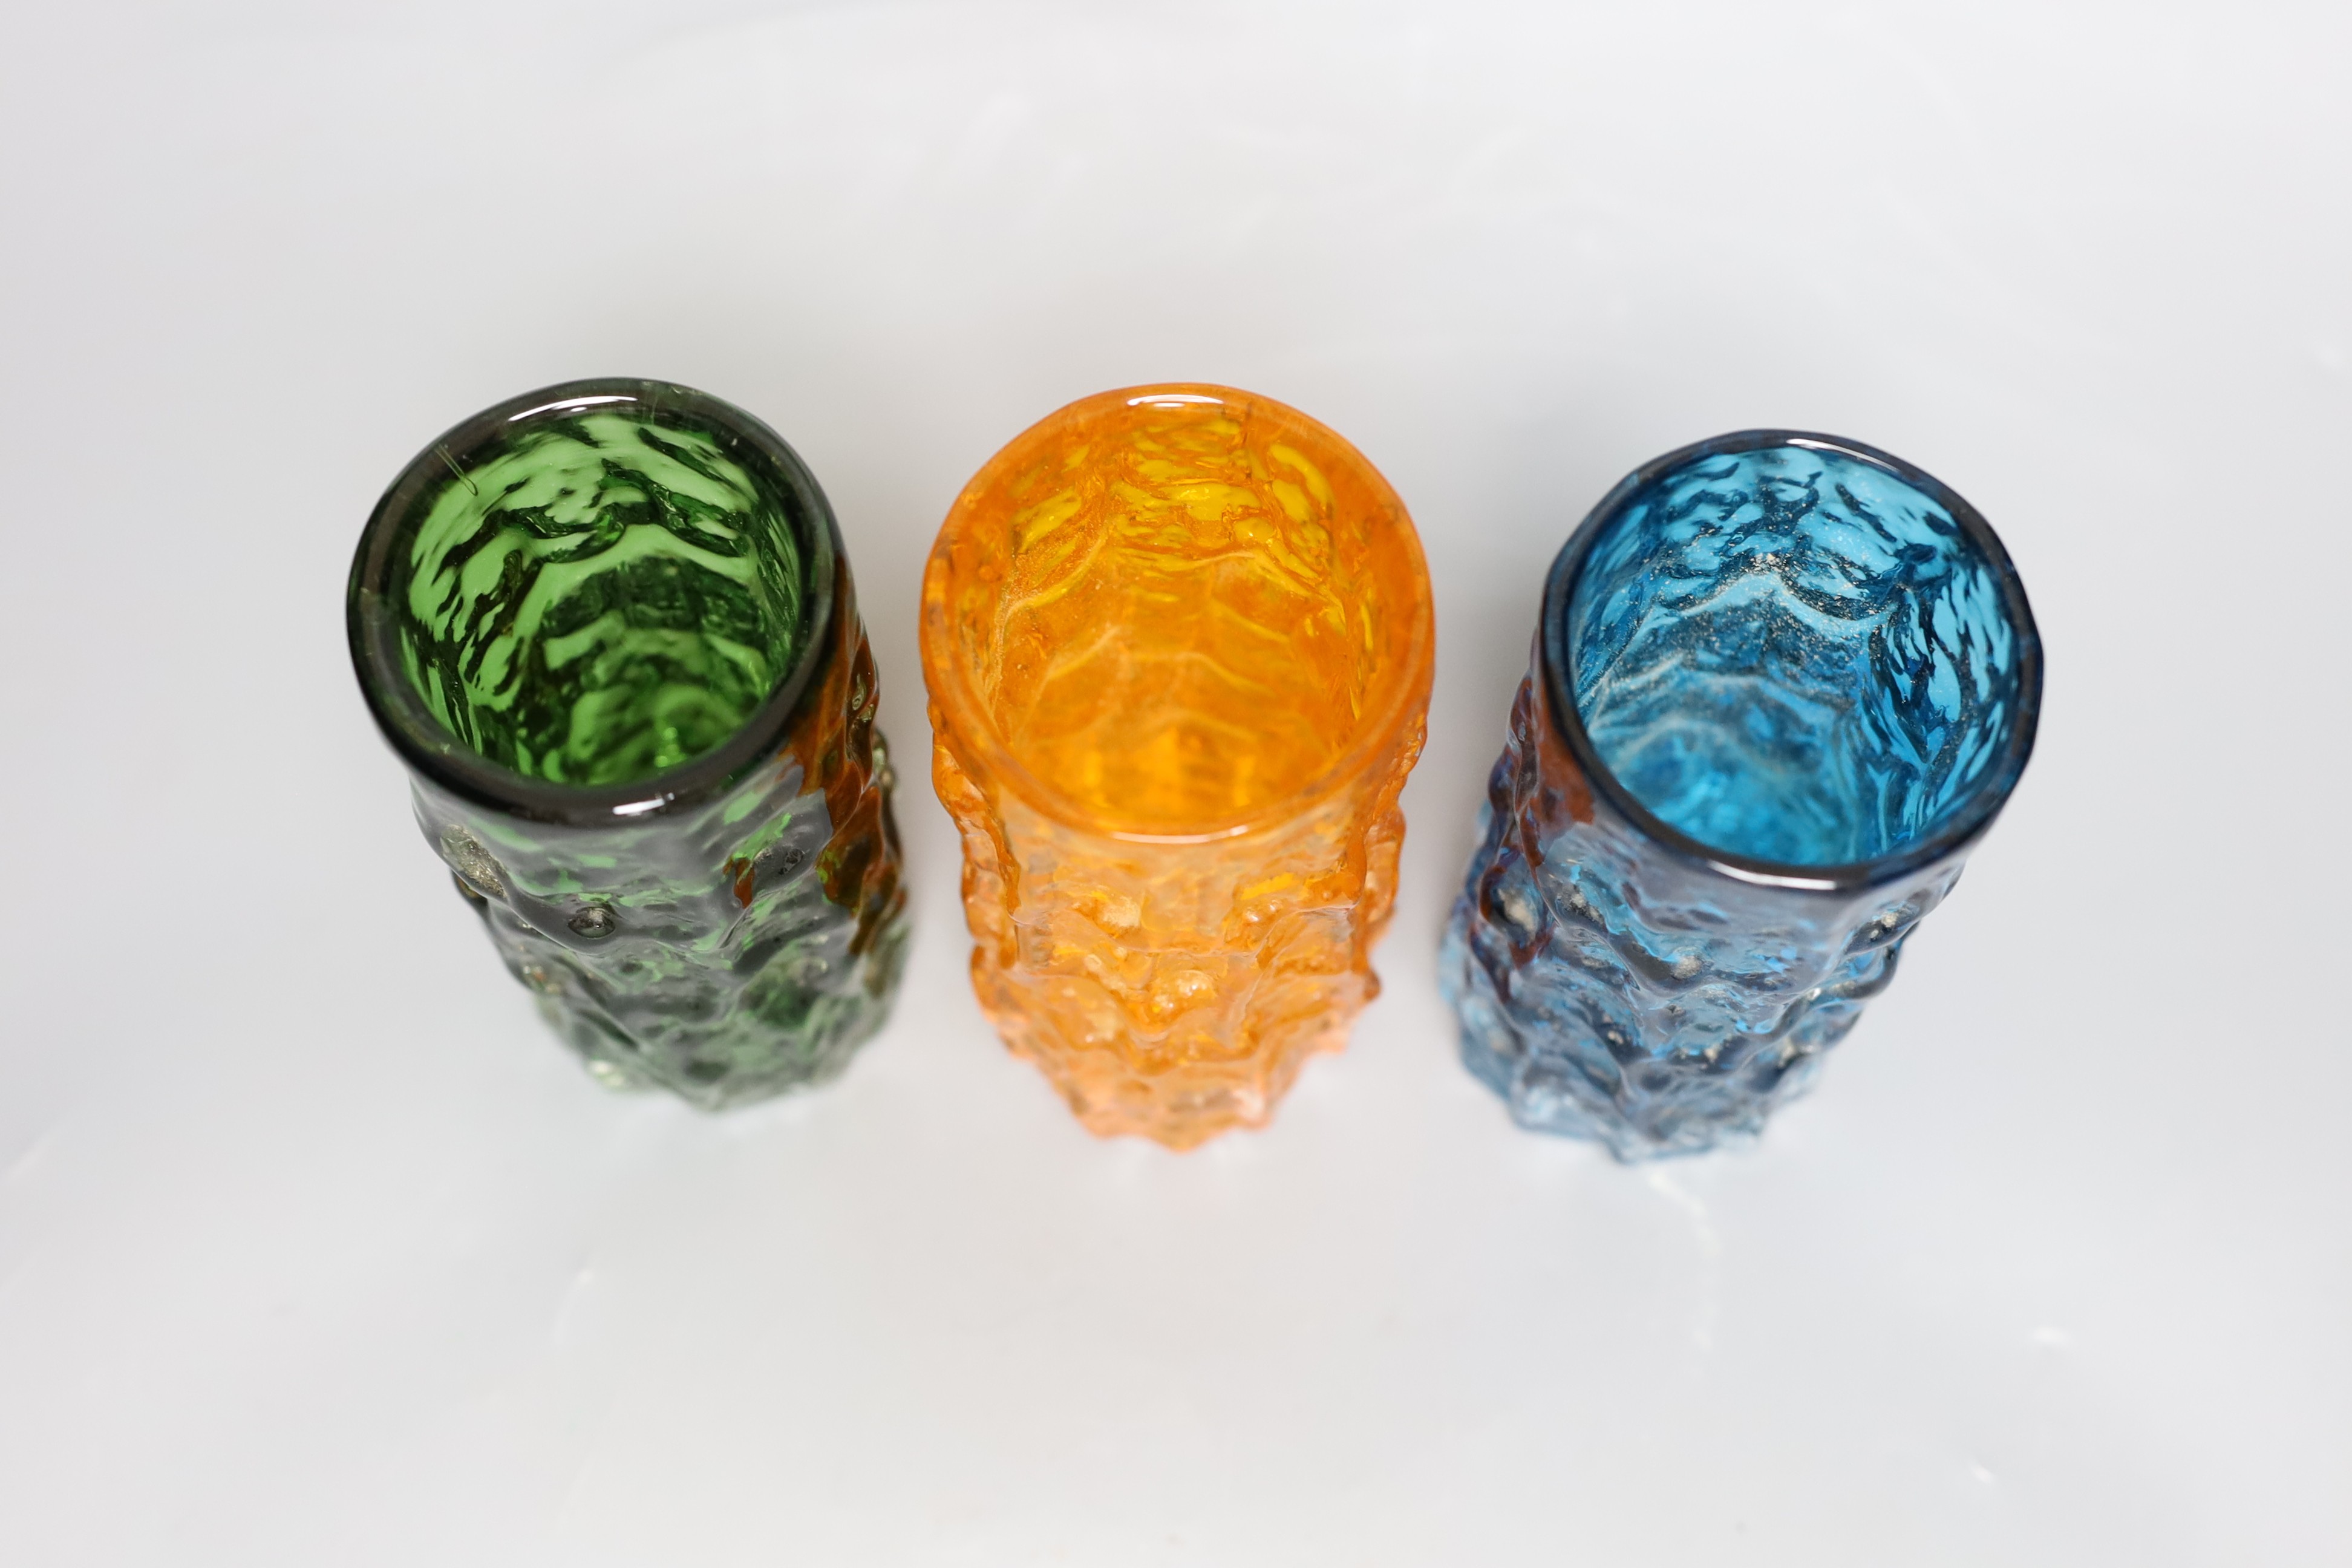 Three Whitefriars 'bark' cylinder vases, model 9689 designed by Geoffrey Baxter, kingfisher blue, tangerine and green glass, each 15cm high.